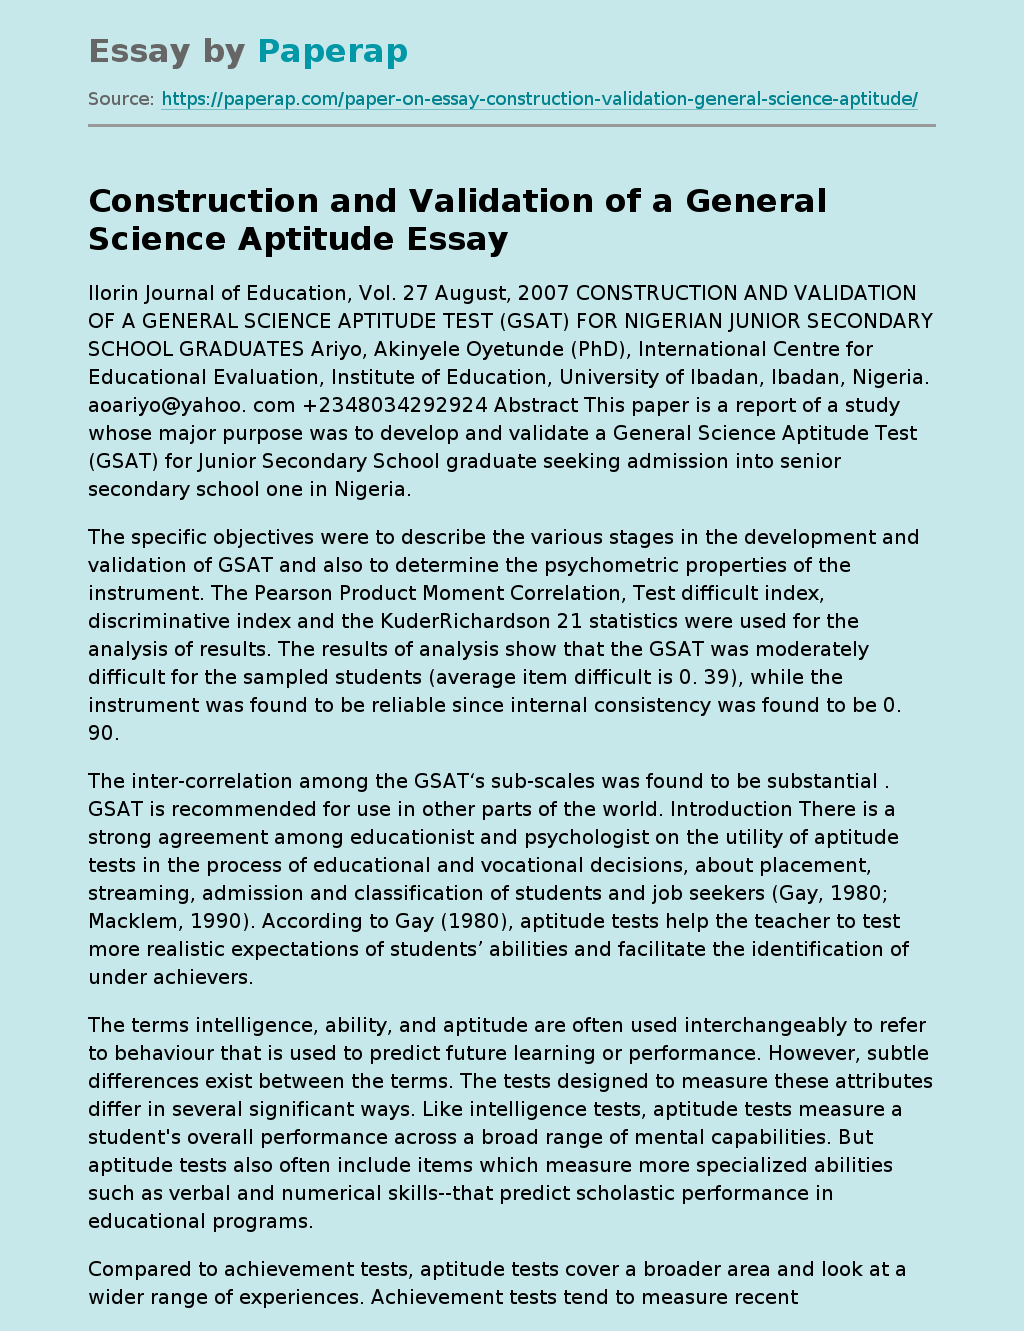 Construction and Validation of a General Science Aptitude